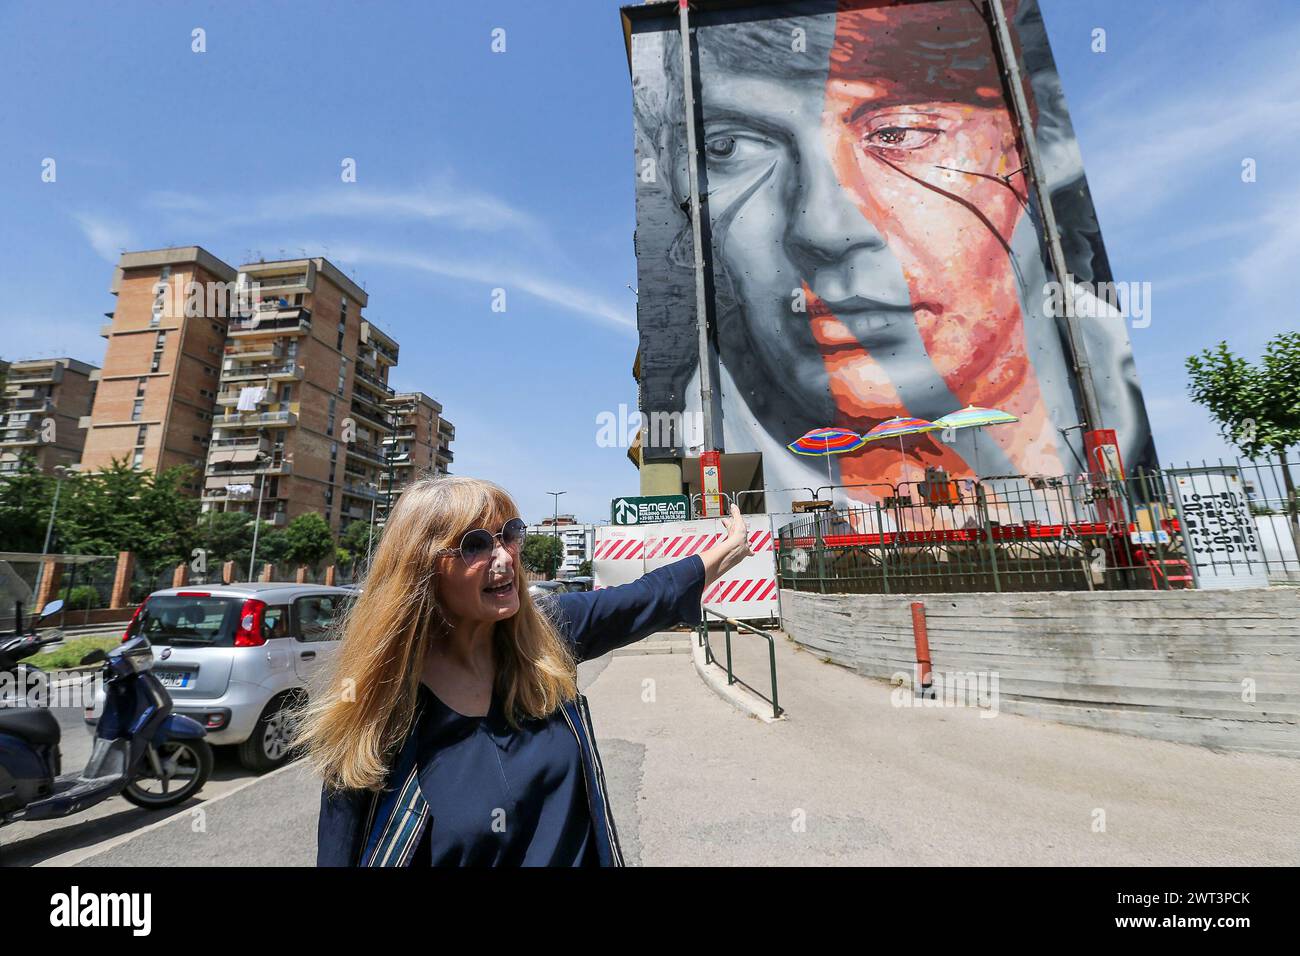 Dori Ghezzi, the singer, and widow of Fabrizio De Andrè, in front of the mural, by Jorit and Trisha, depicting the famous Italian singer-songwriter, o Stock Photo